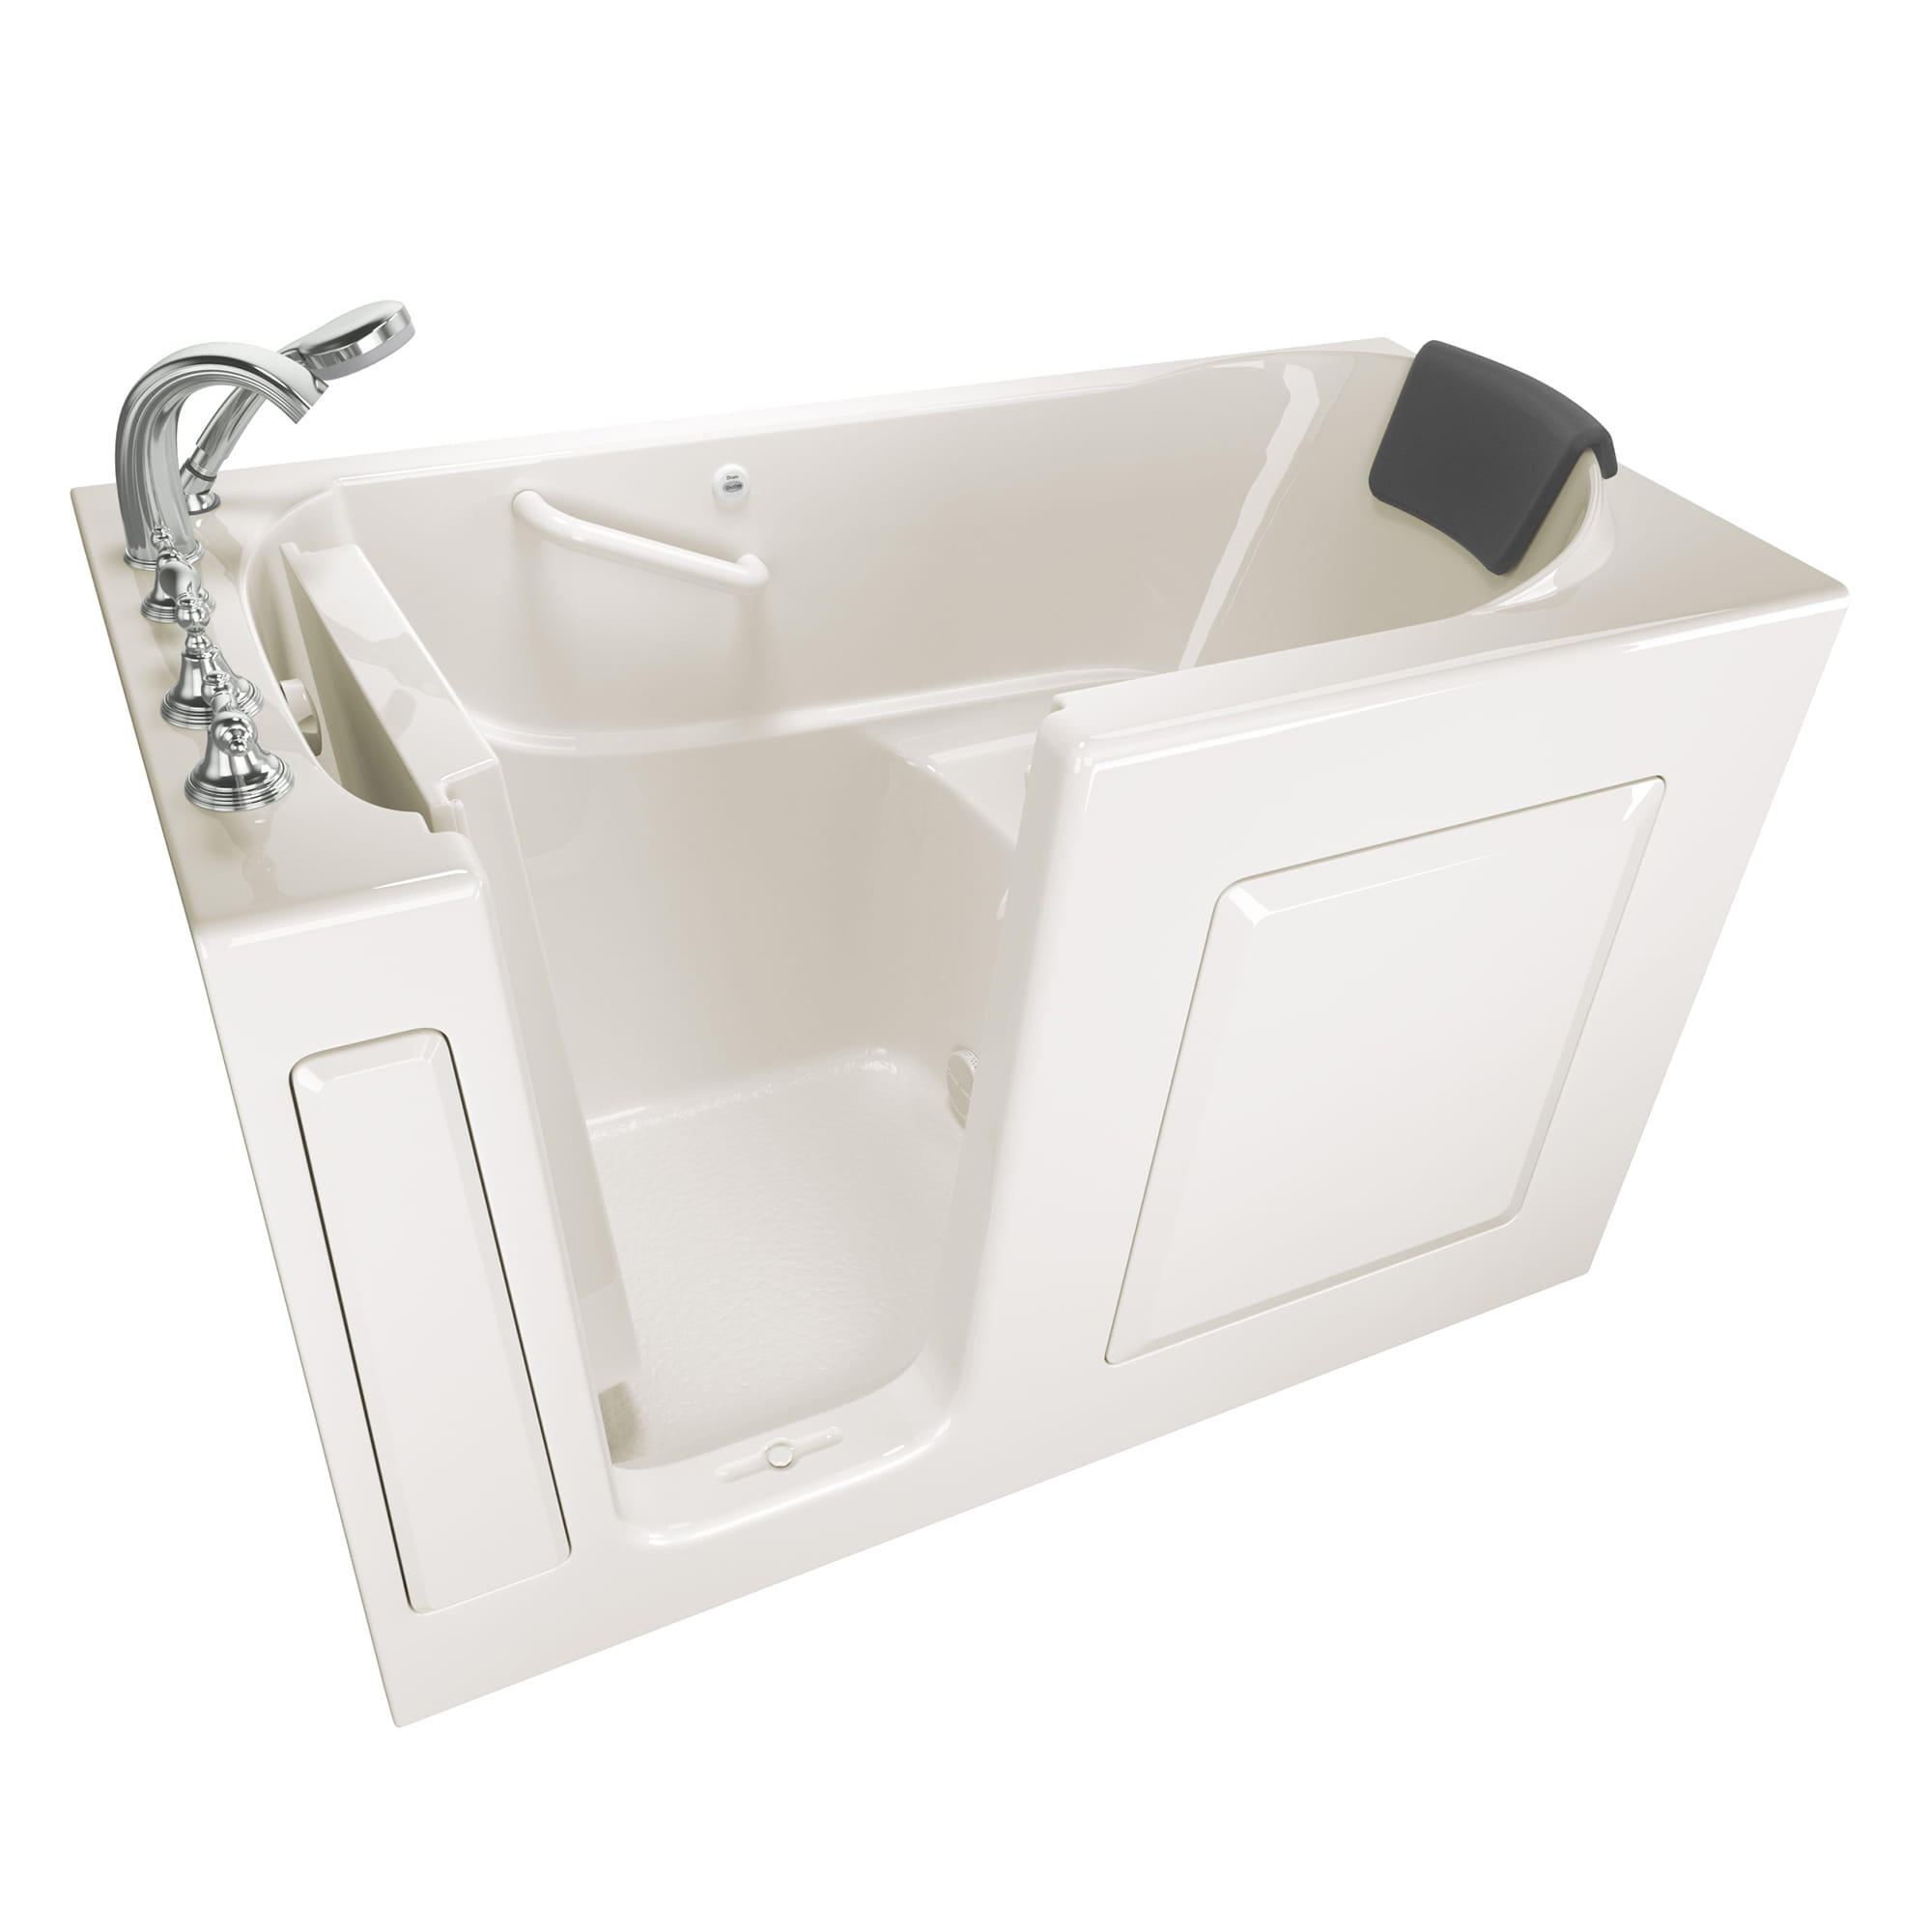 Gelcoat Premium Series 30 x 60 -Inch Walk-in Tub With Soaker System - Left-Hand Drain With Faucet